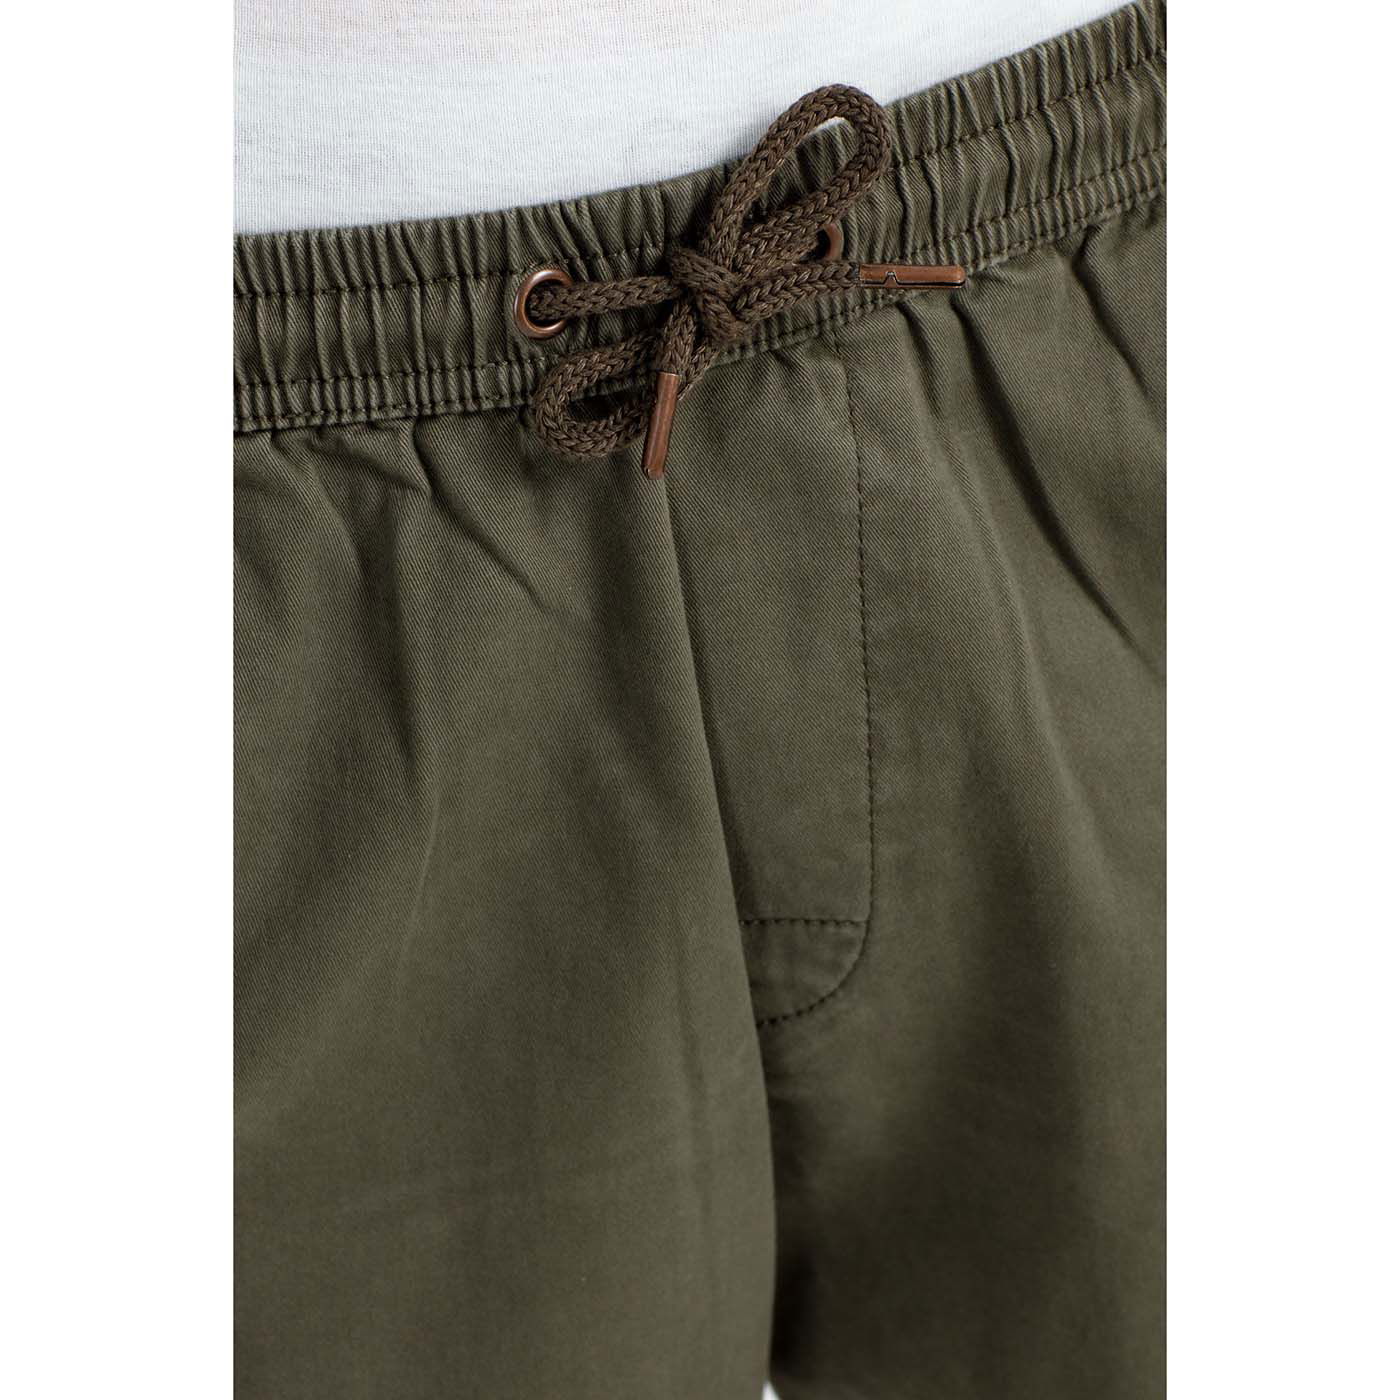 Reell Jeans Reflex Easy Cargo Short Olive